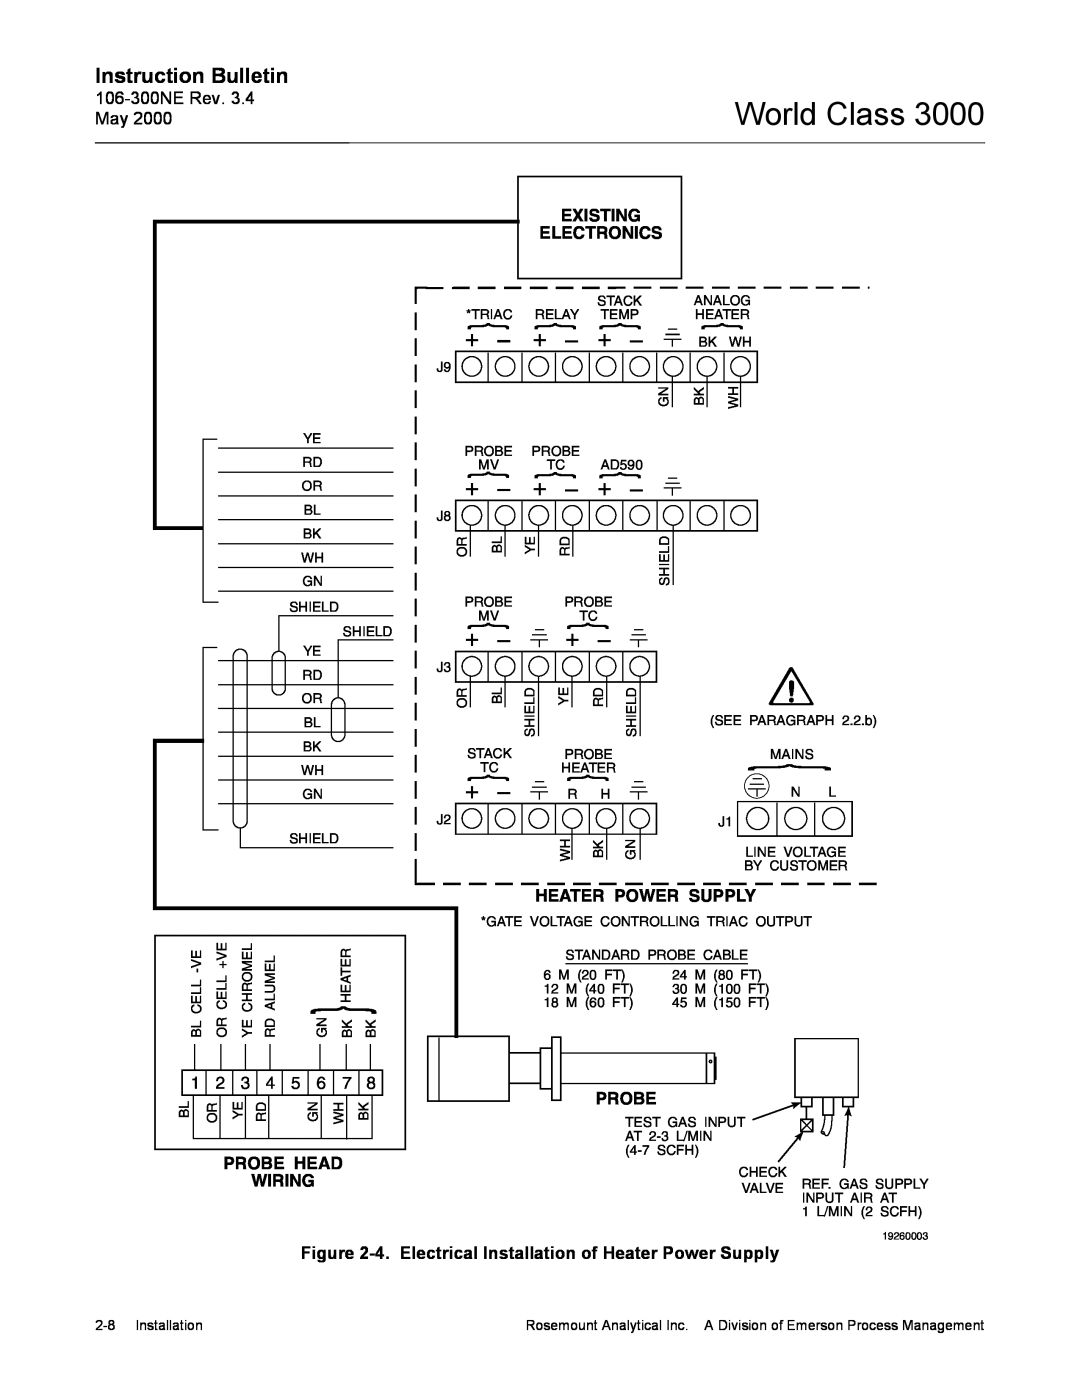 Emerson 3000 manual Instruction Bulletin, Existing Electronics, Heater Power Supply, Probe Head Wiring, 2-8Installation 